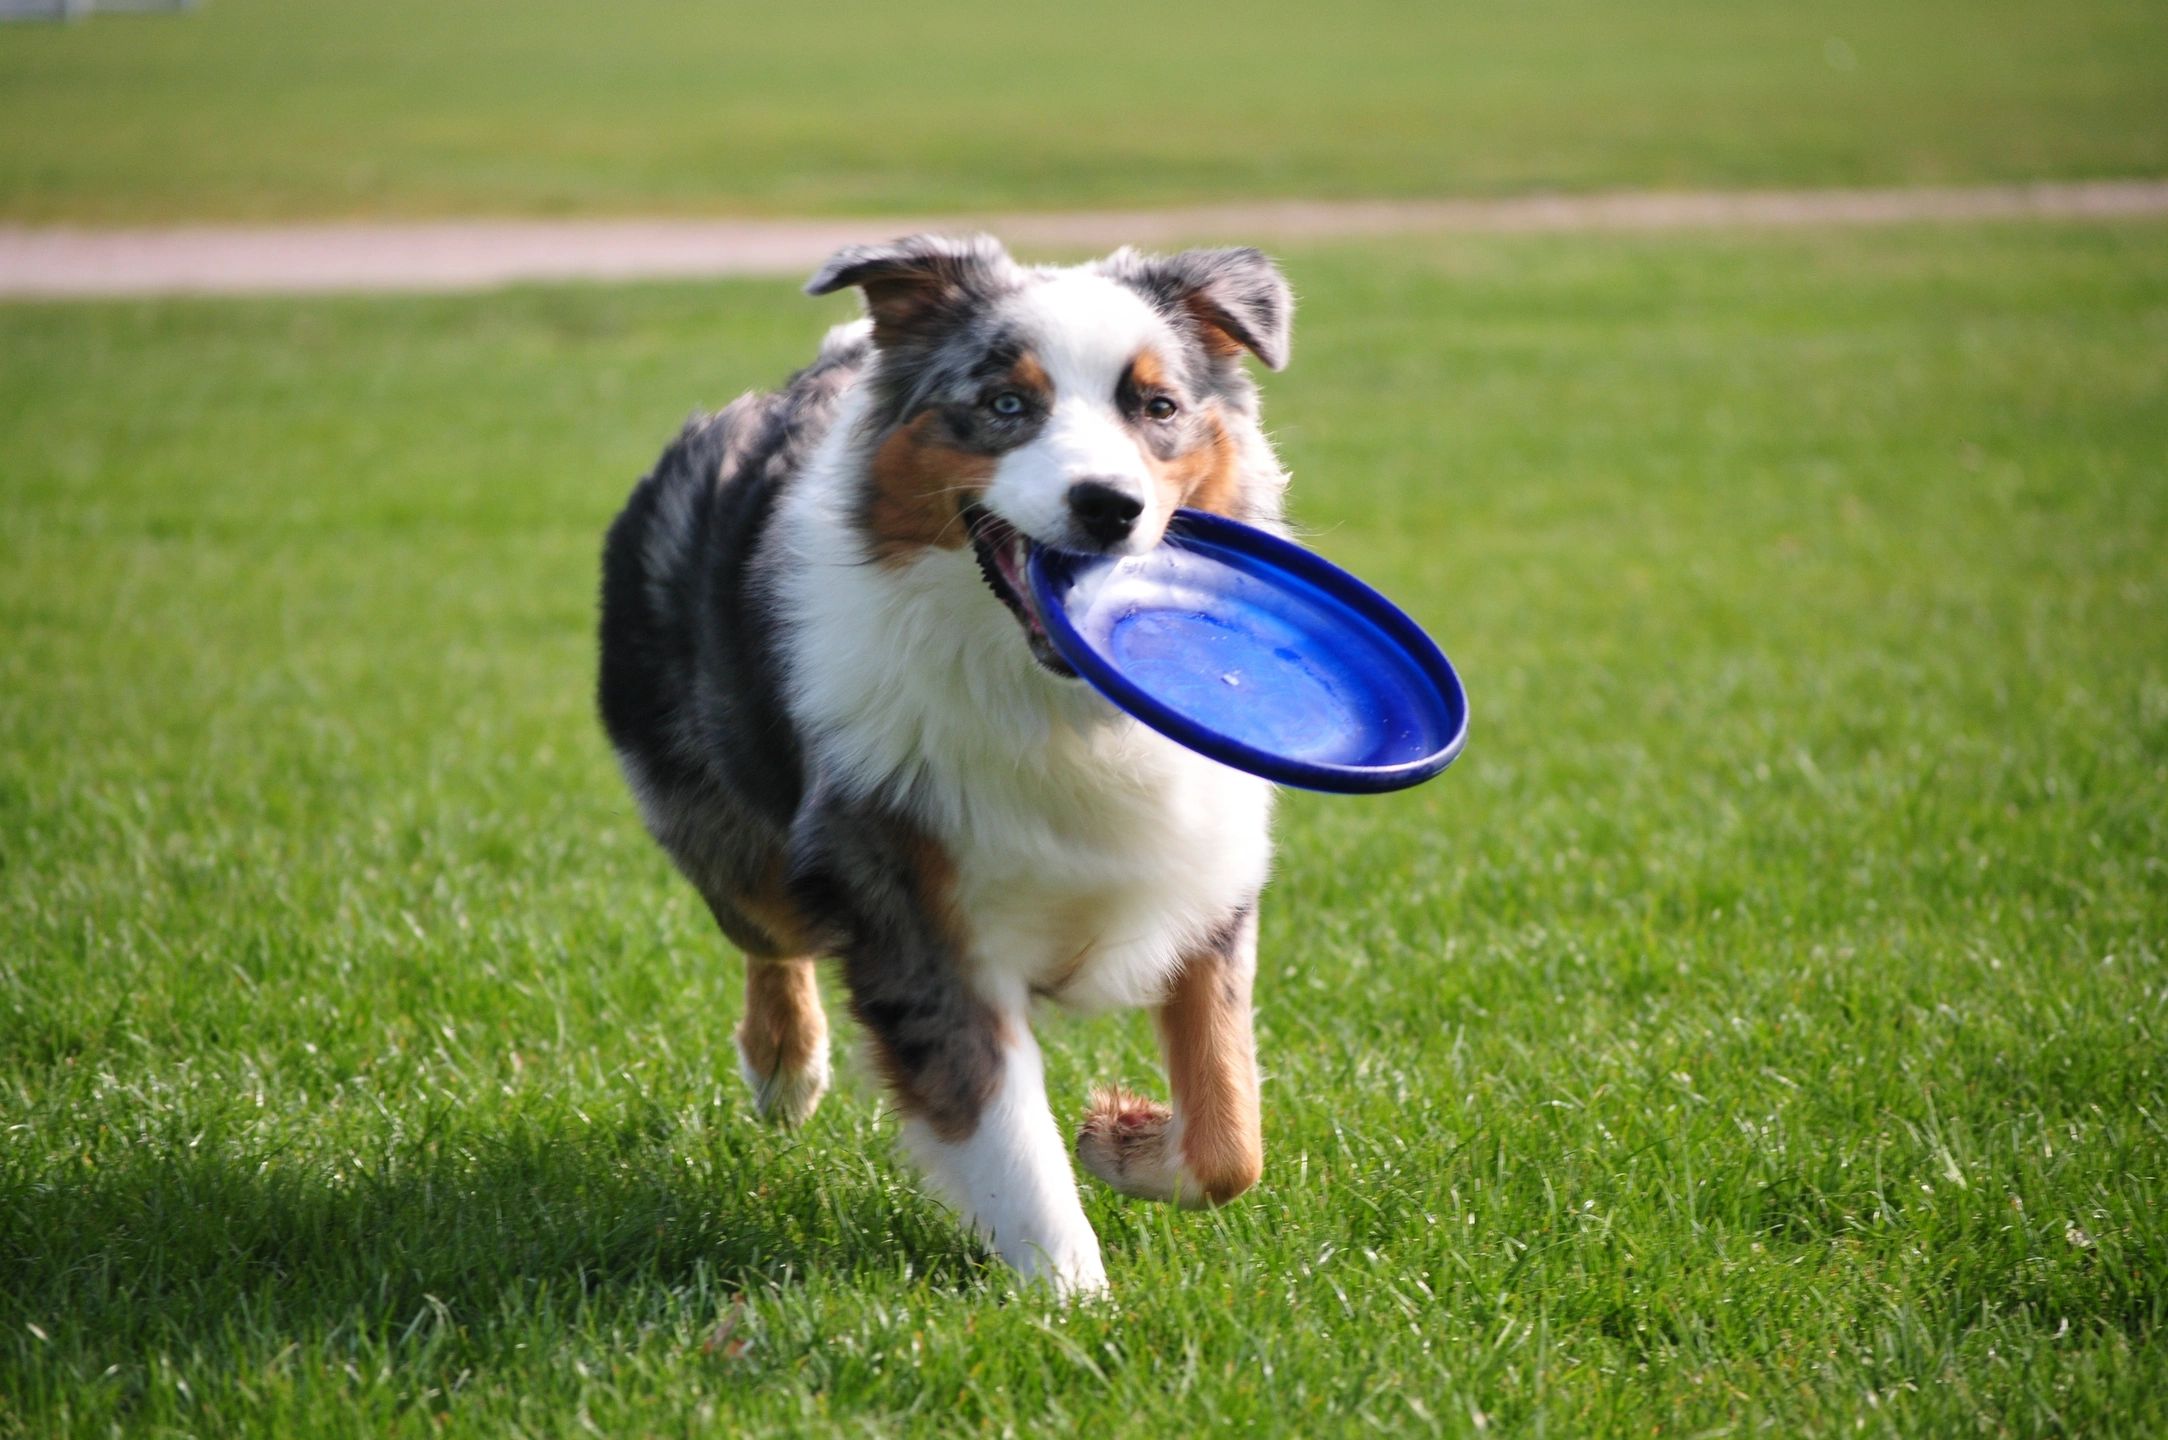 Sheltie carrying a frisbee